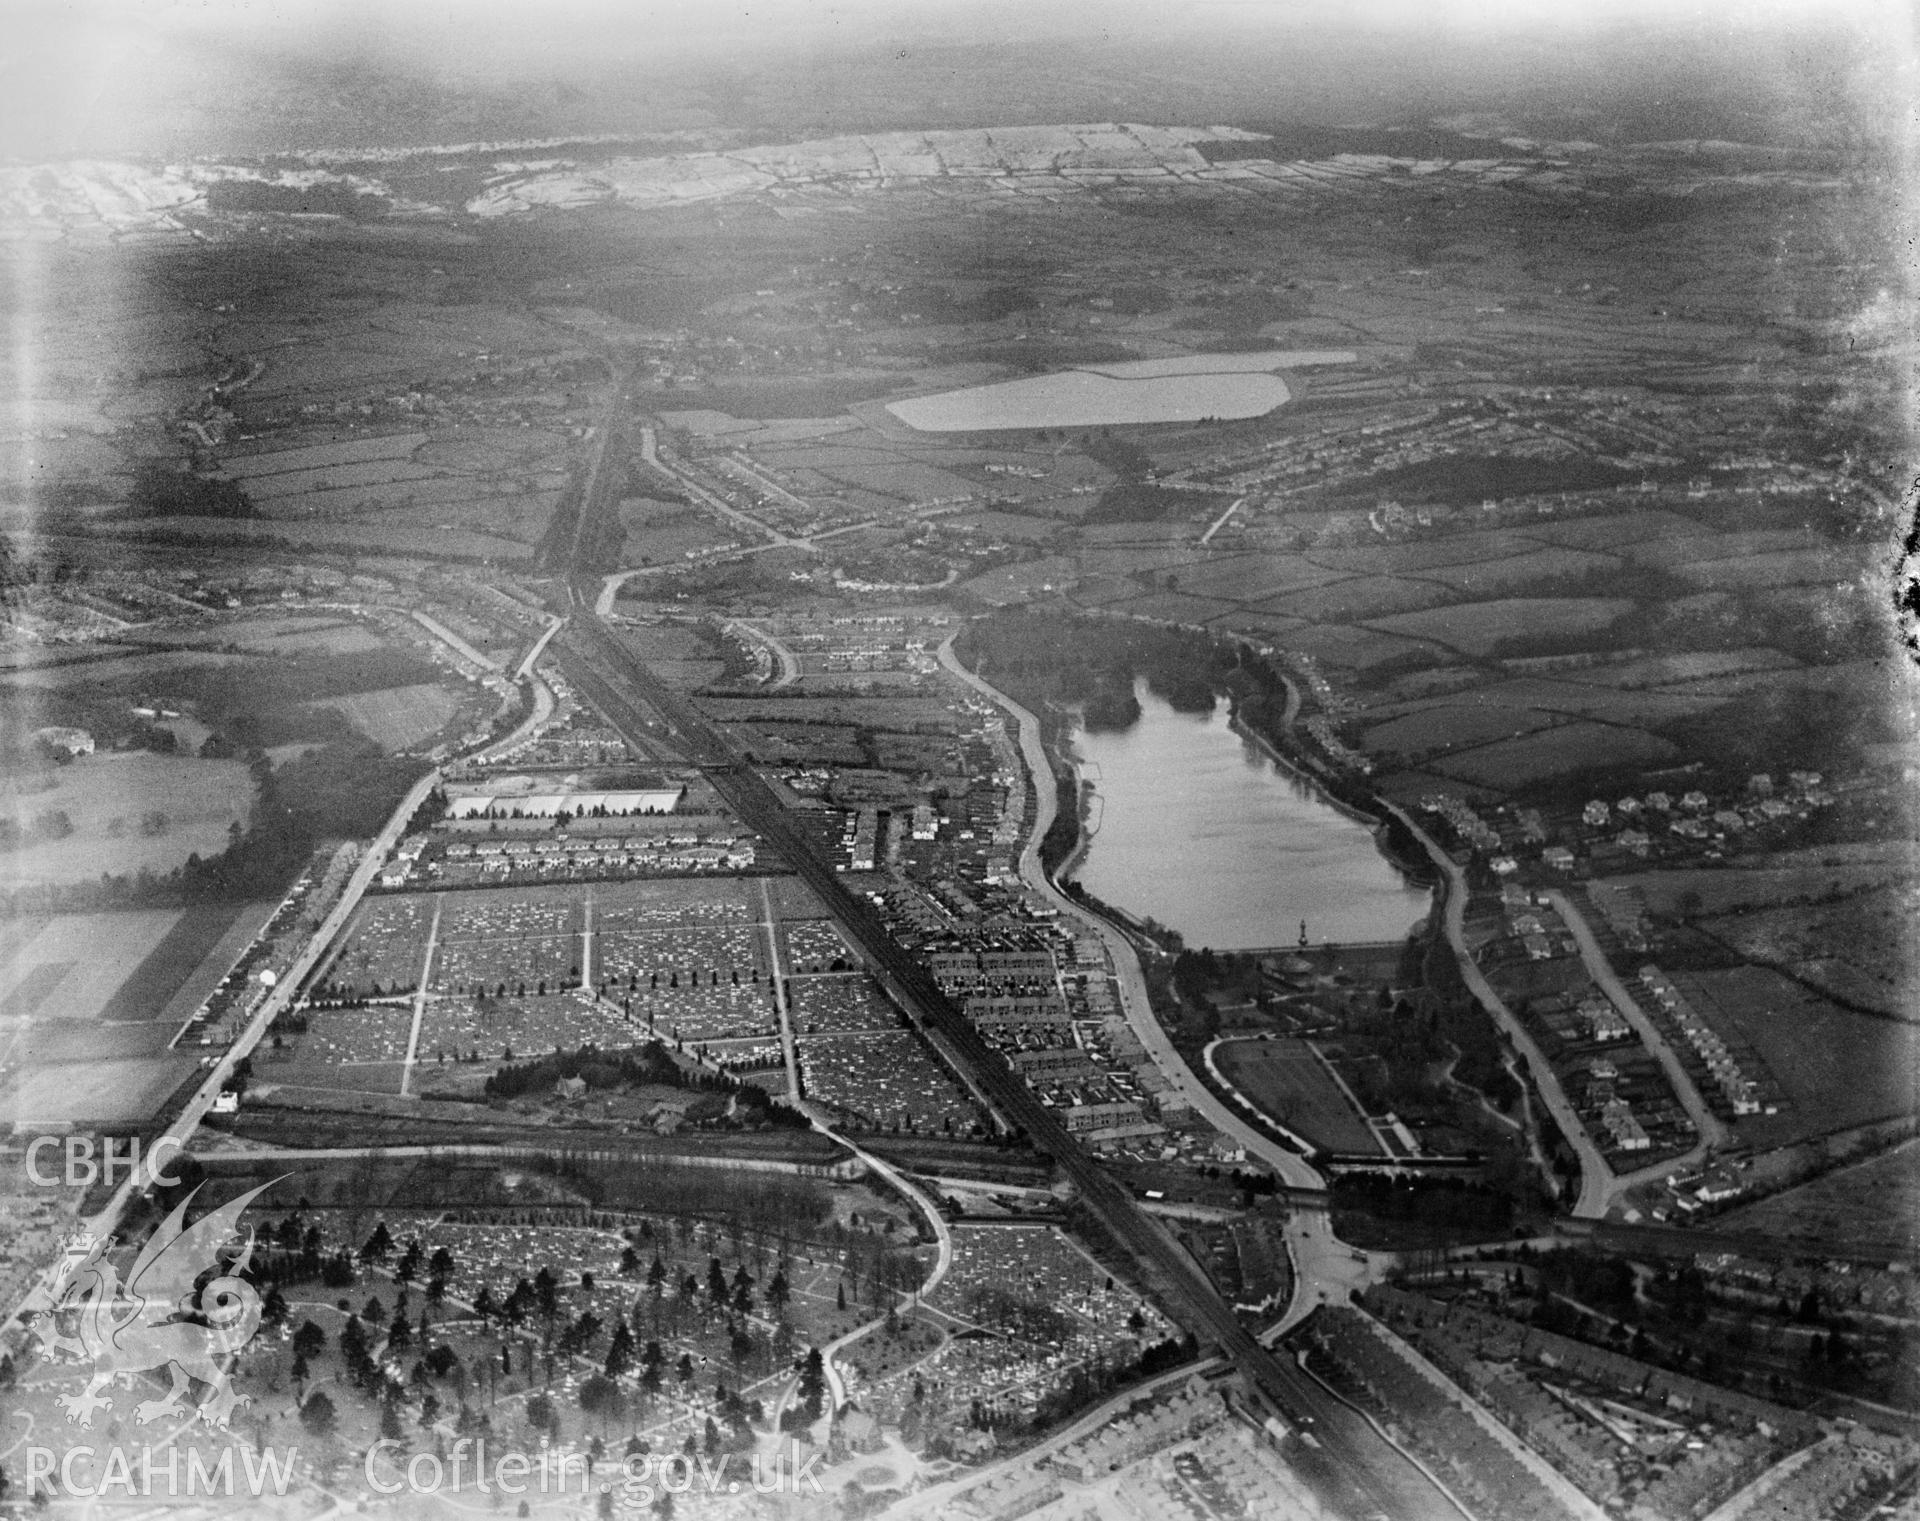 View of Cardiff showing Roath Park and Cardiff Cemetery, oblique aerial view. 5?x4? black and white glass plate negative.